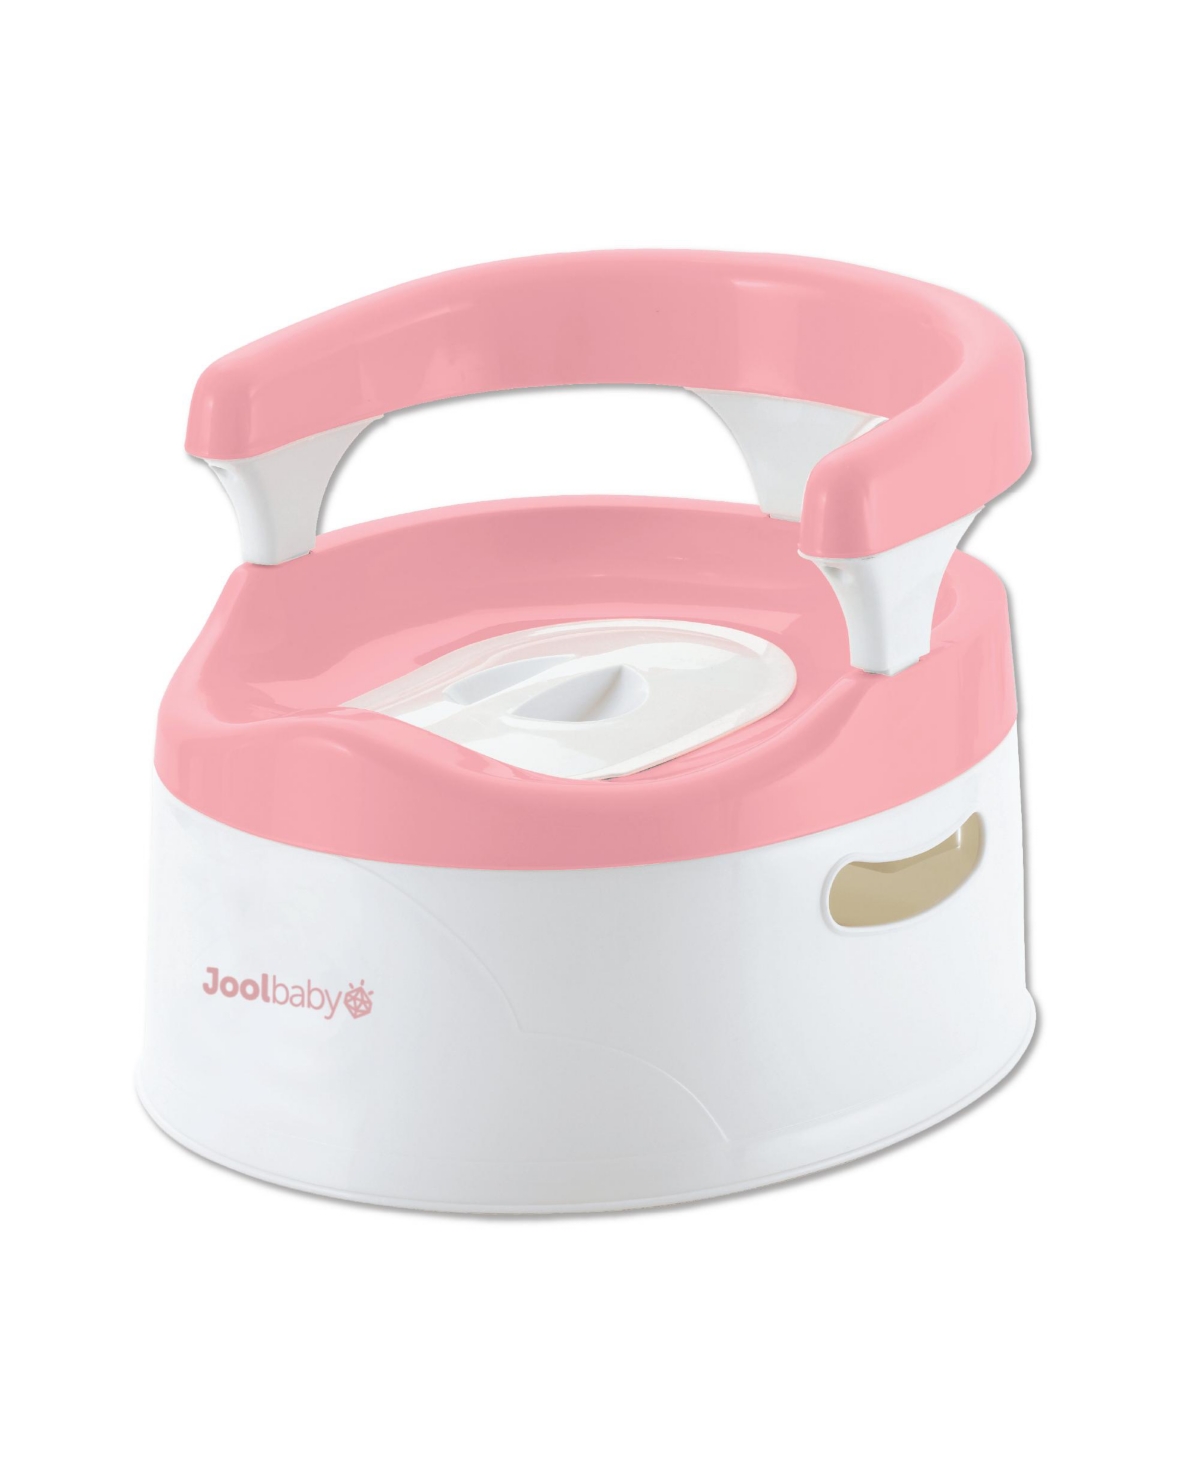 Jool Baby Potty Training Chair With Handles, Splash Guard, Removable Bowl, Unisex In Pink